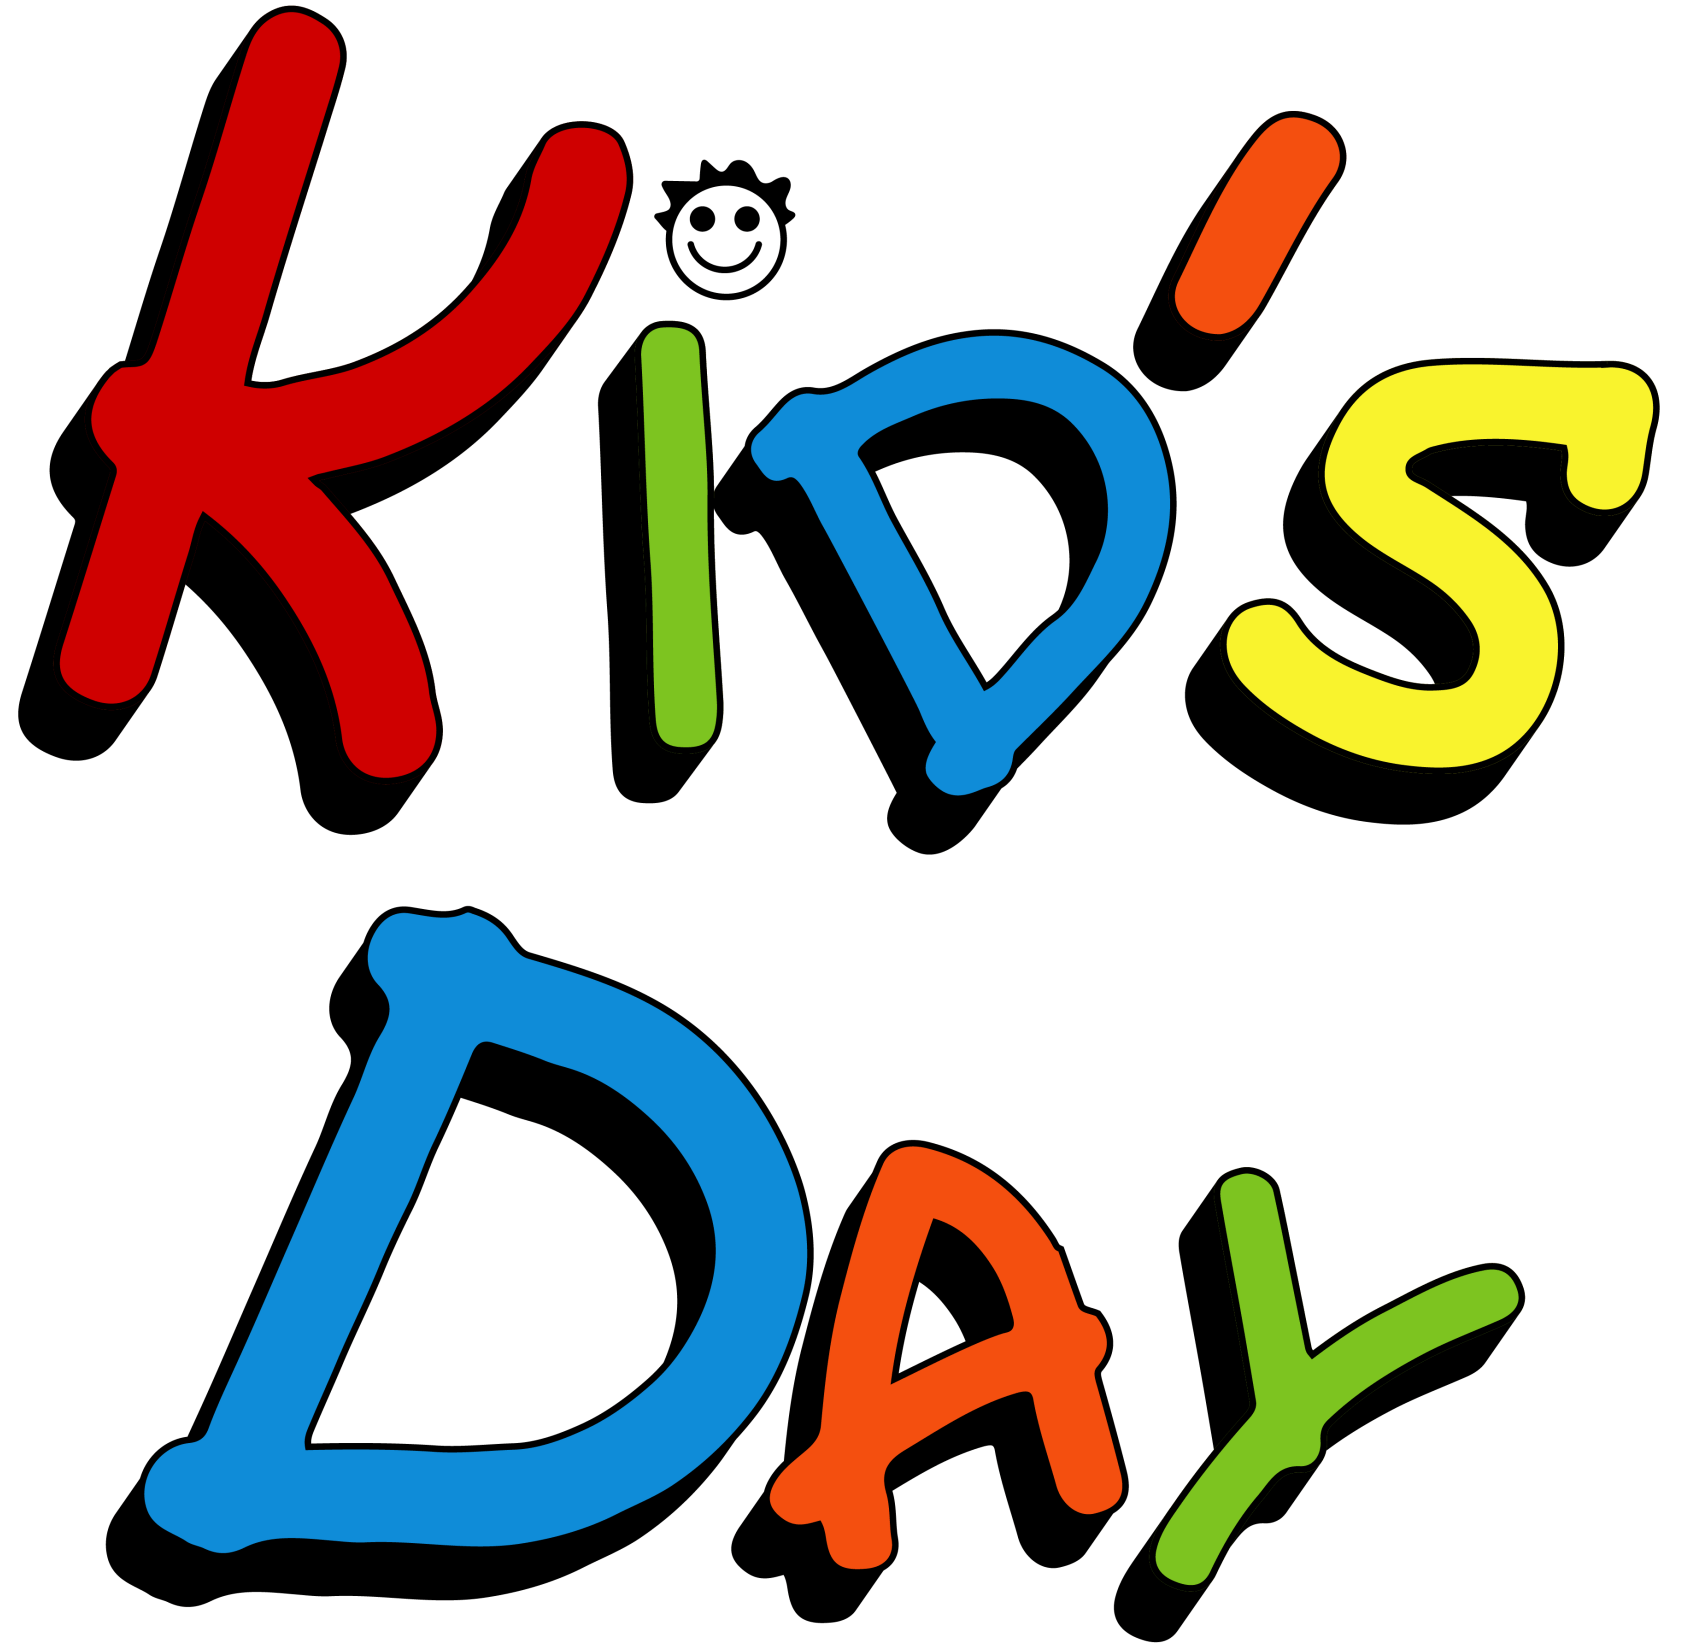 Kid's Day Christian Child Daycare in Bulverde, Texas